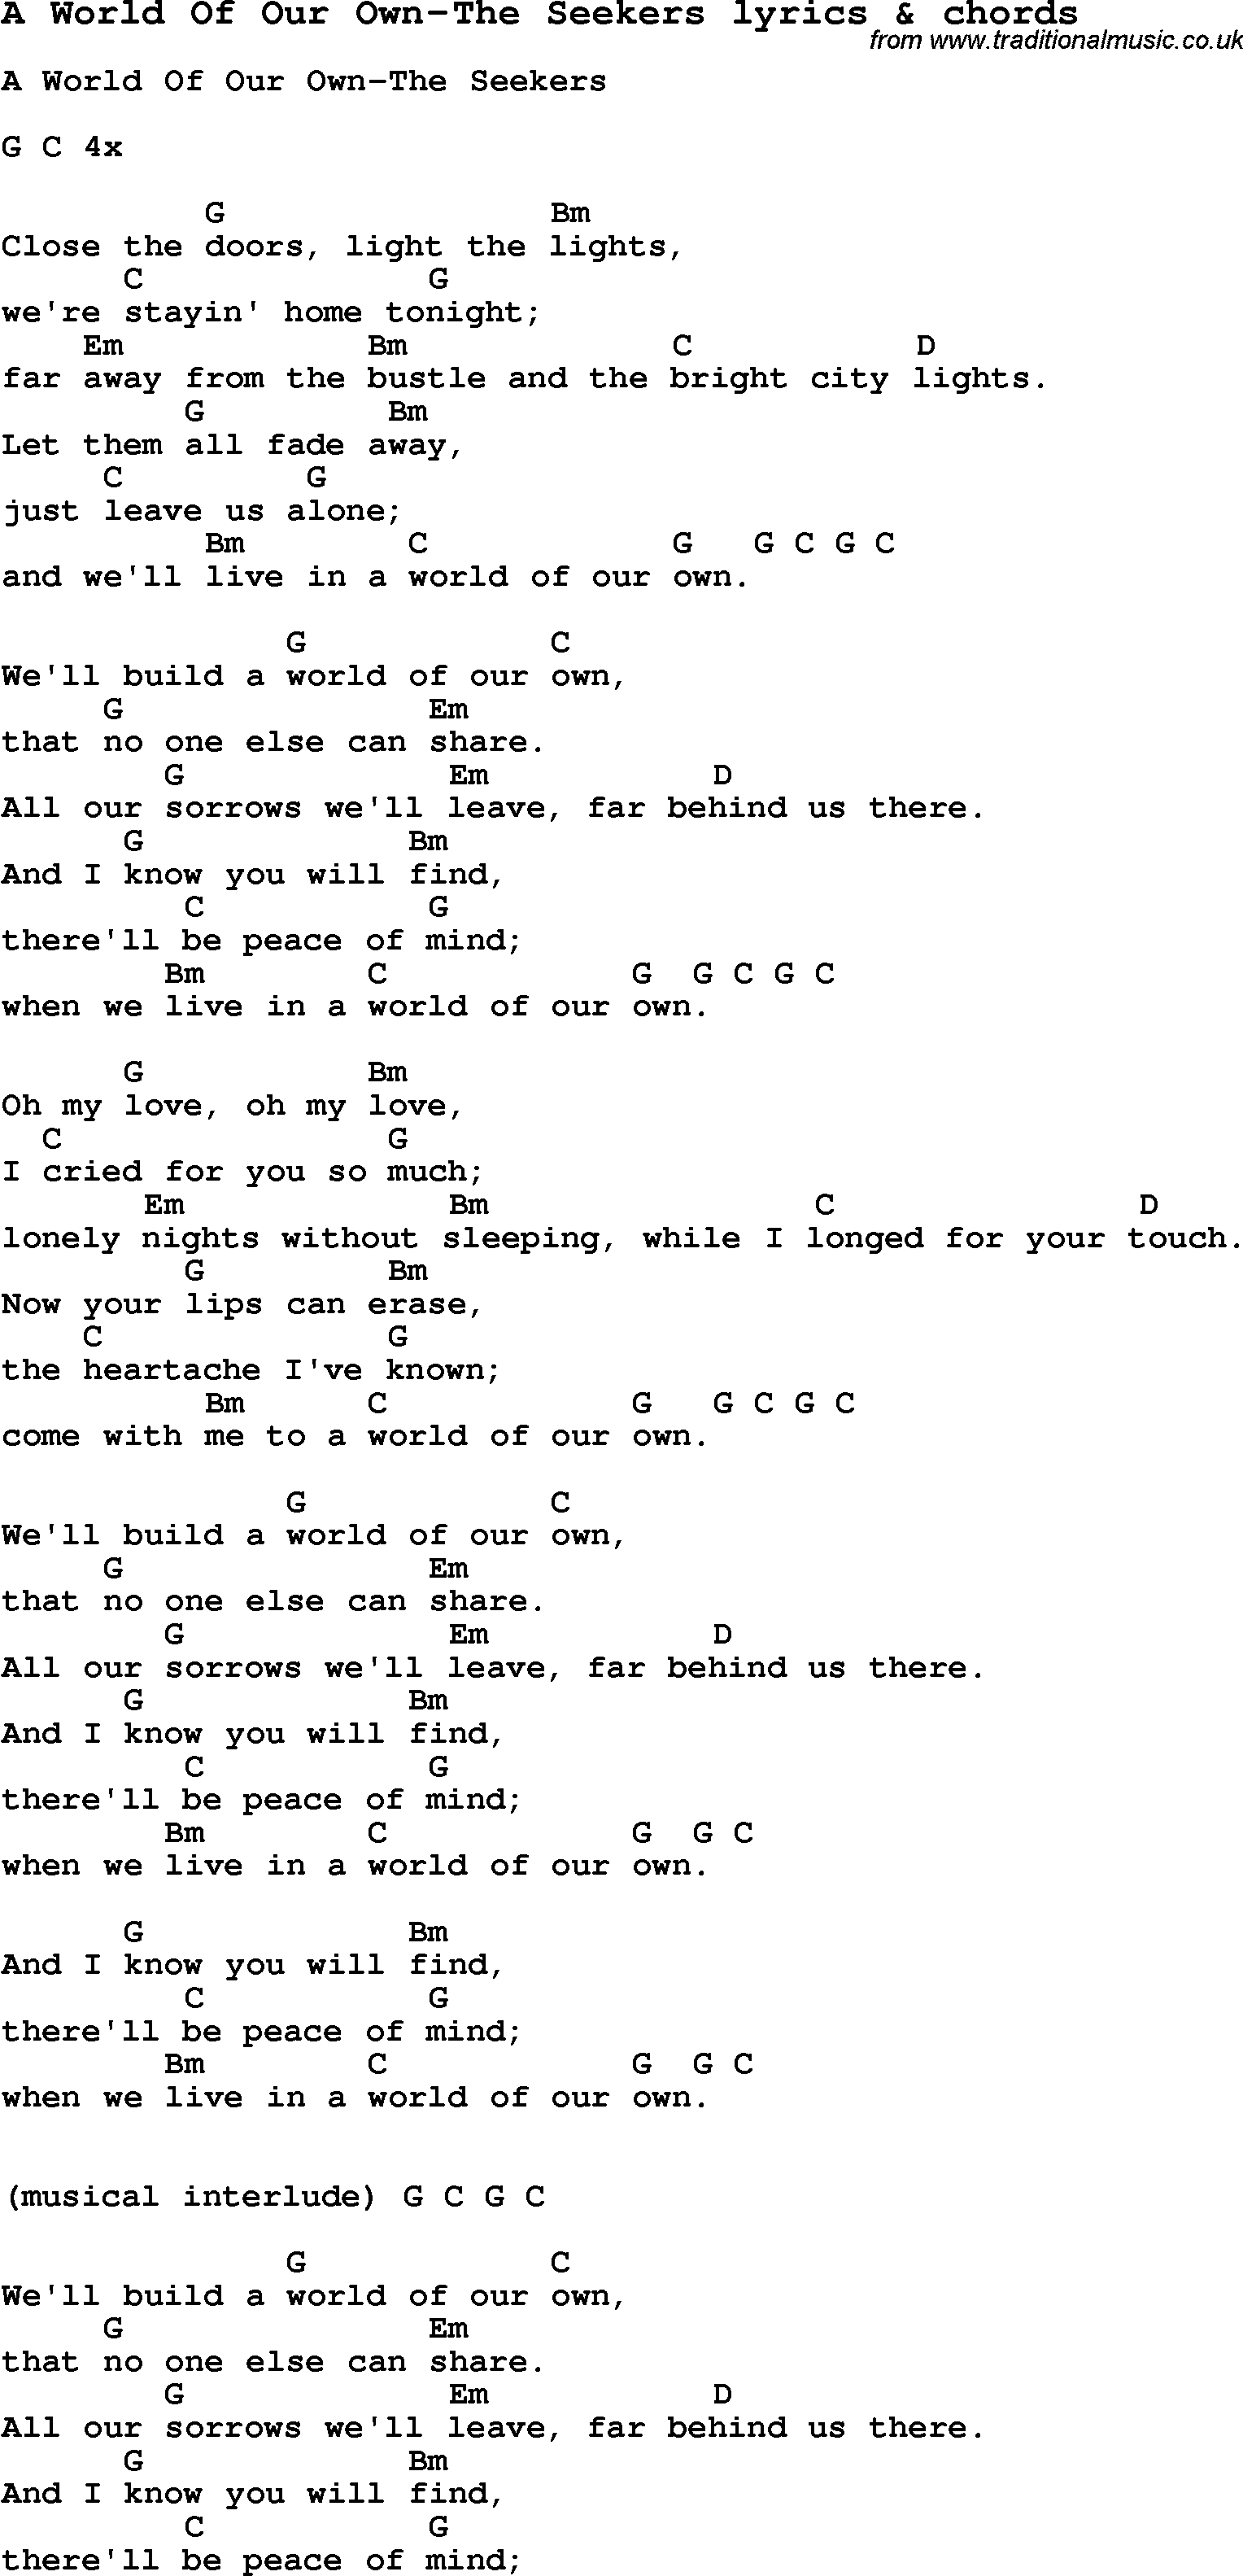 Love Song Lyrics for: A World Of Our Own-The Seekers with chords for Ukulele, Guitar Banjo etc.